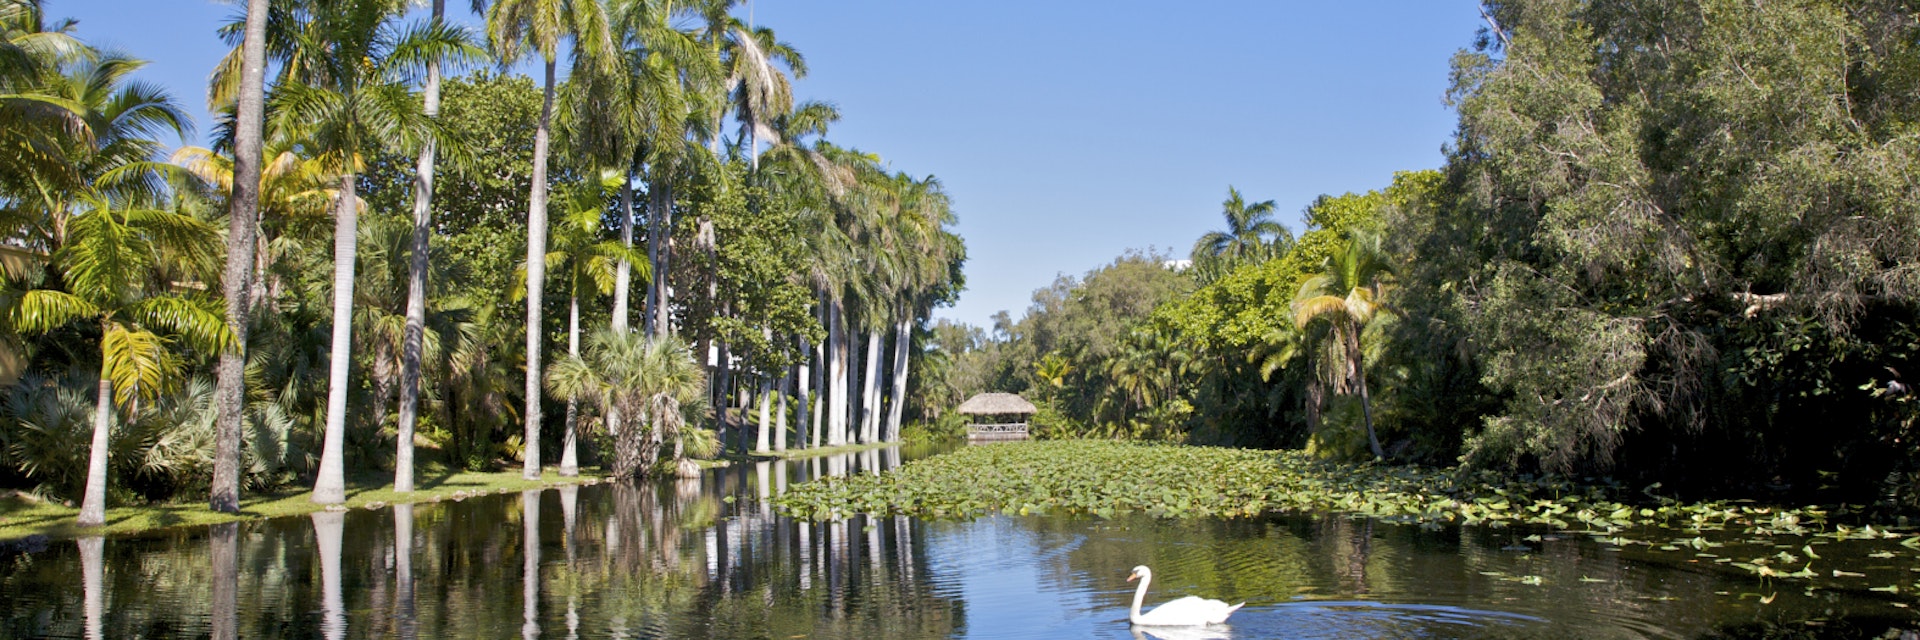 Calm waters with white swan near palms.